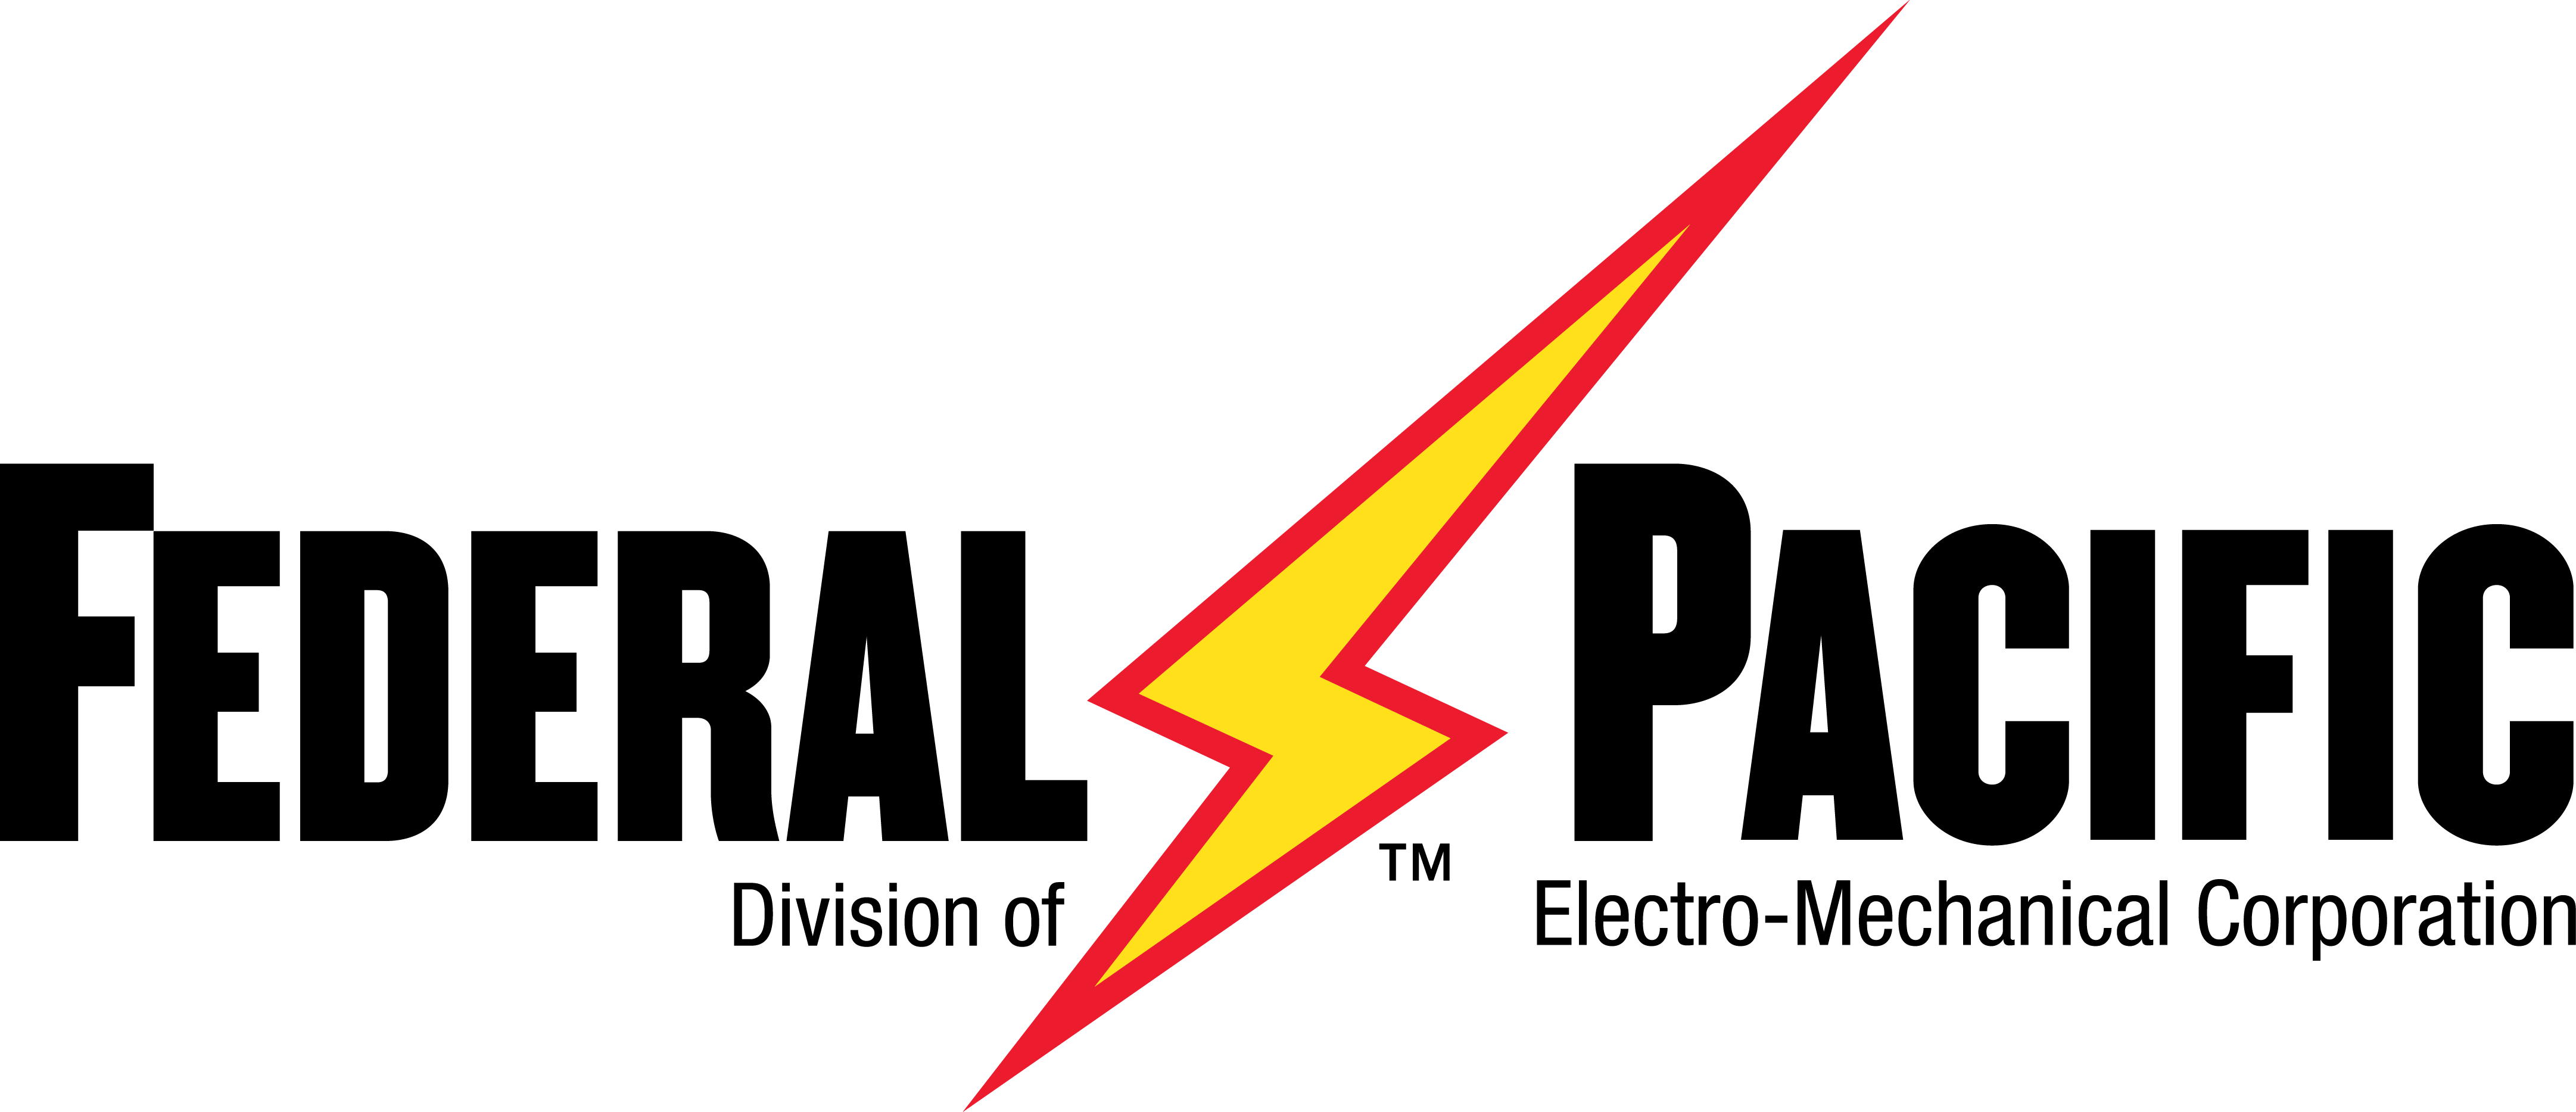 Federal Logo - Home - Federal Pacific